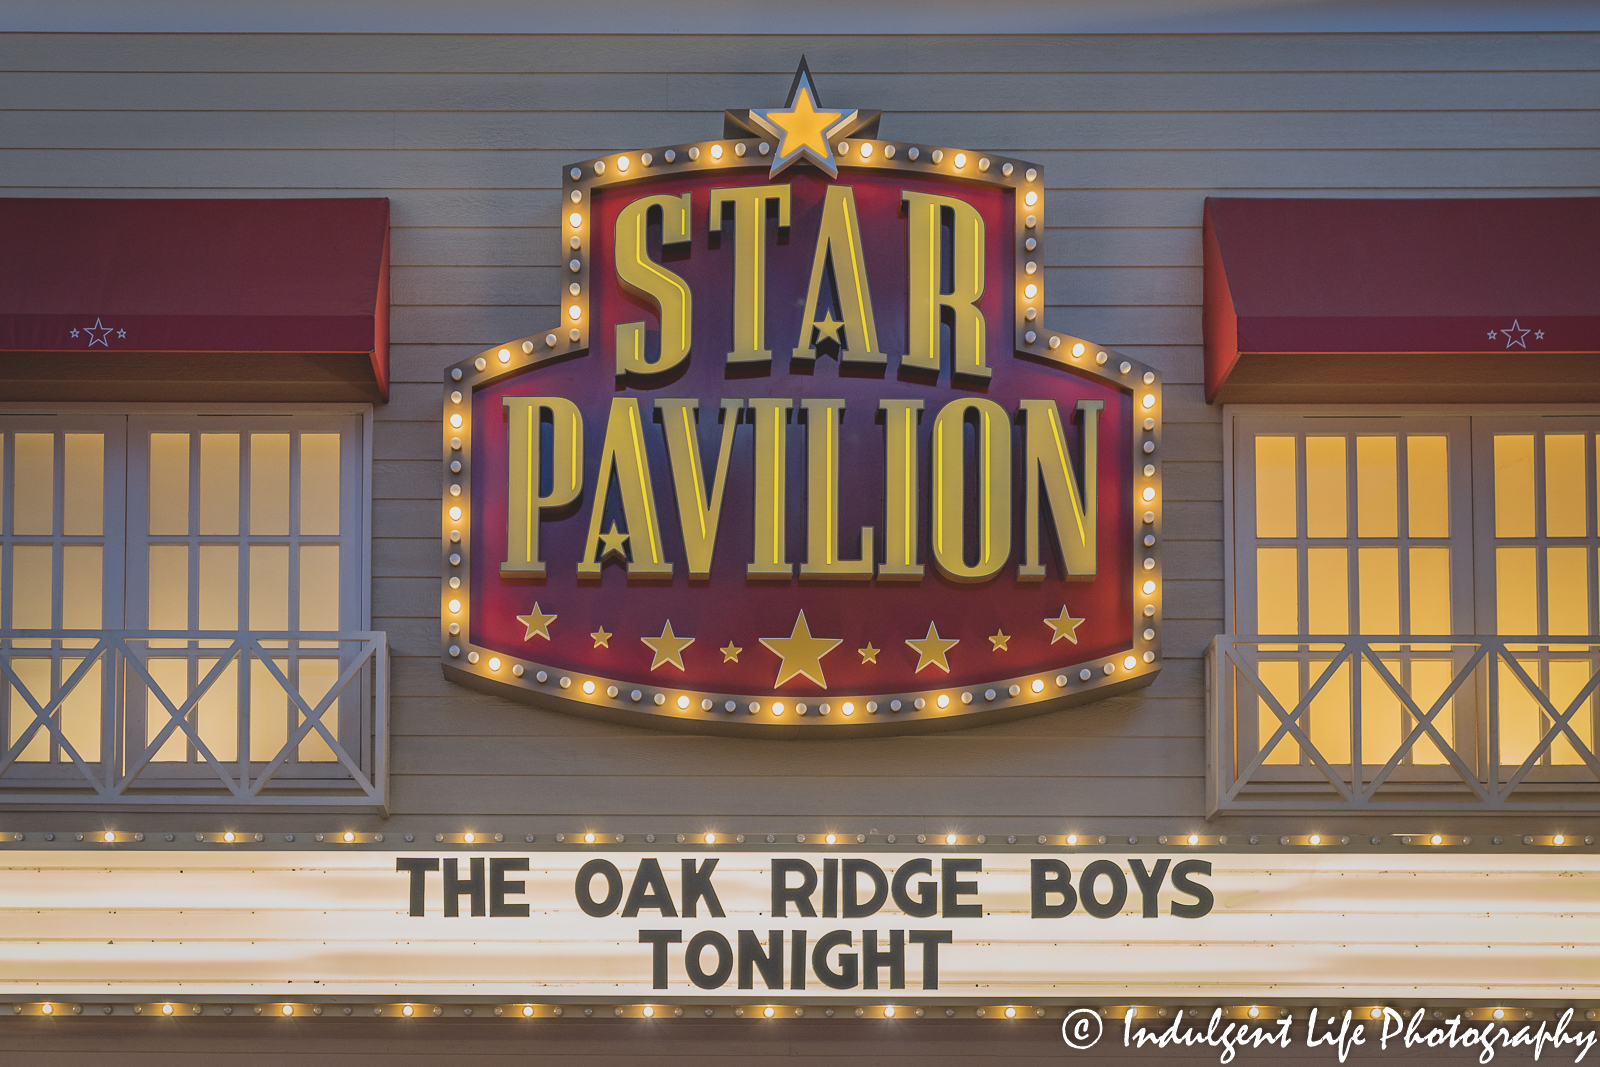 Star Pavilion marquee at Ameristar Casino in Kansas City, MO featuring The Oak Ridge Boys on July 15, 2022.